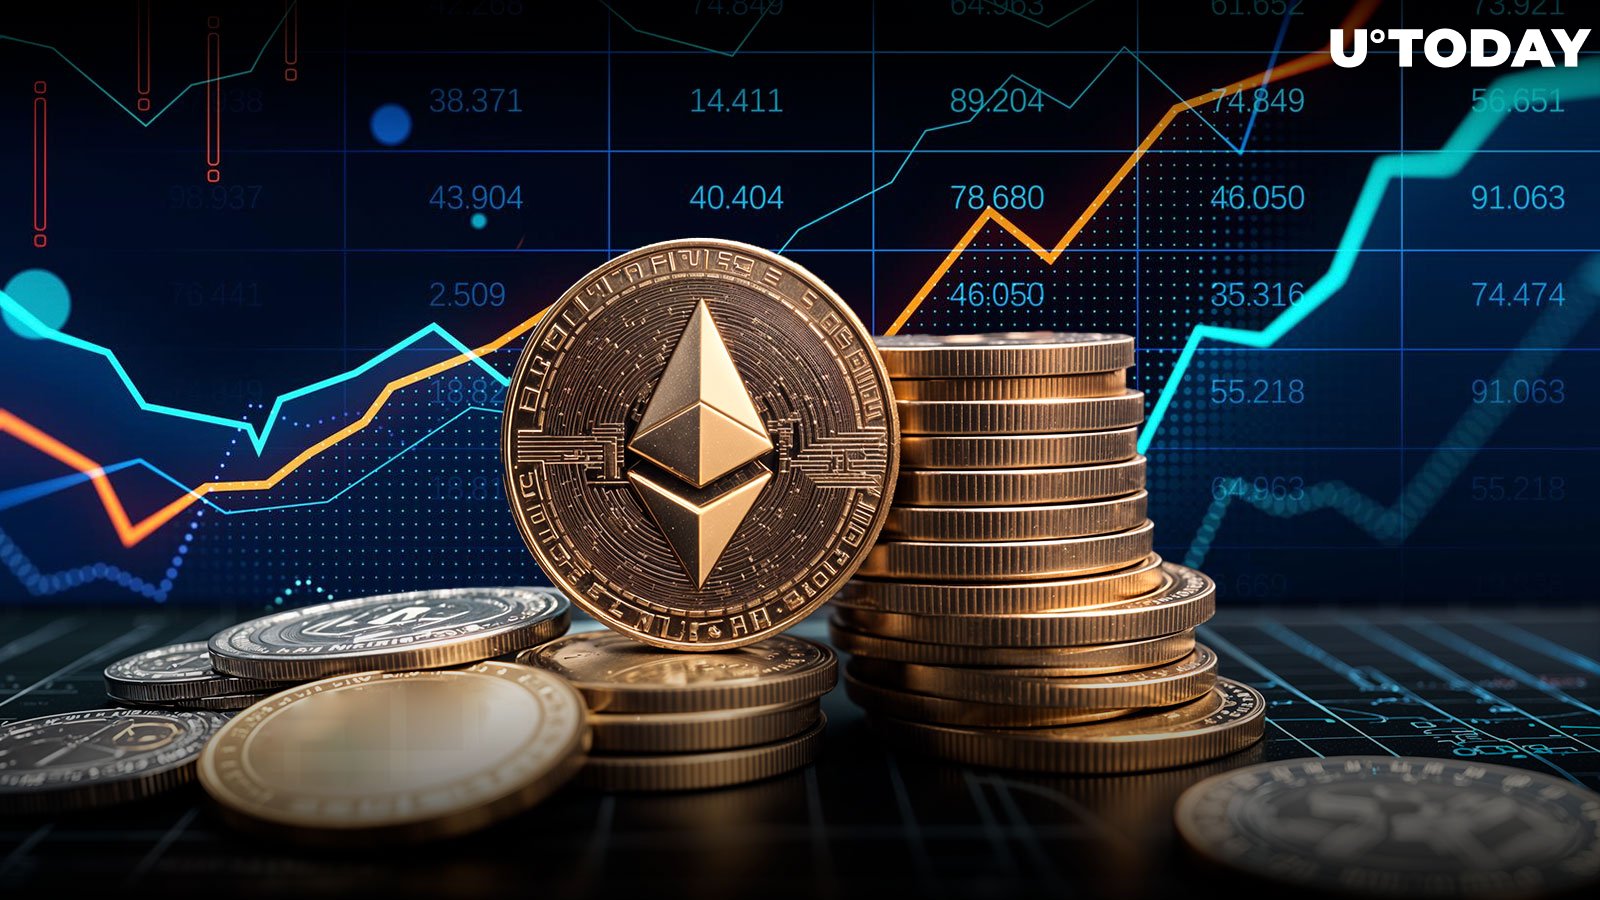 Ethereum (ETH) Contract Holdings Hit Record $14 Billion